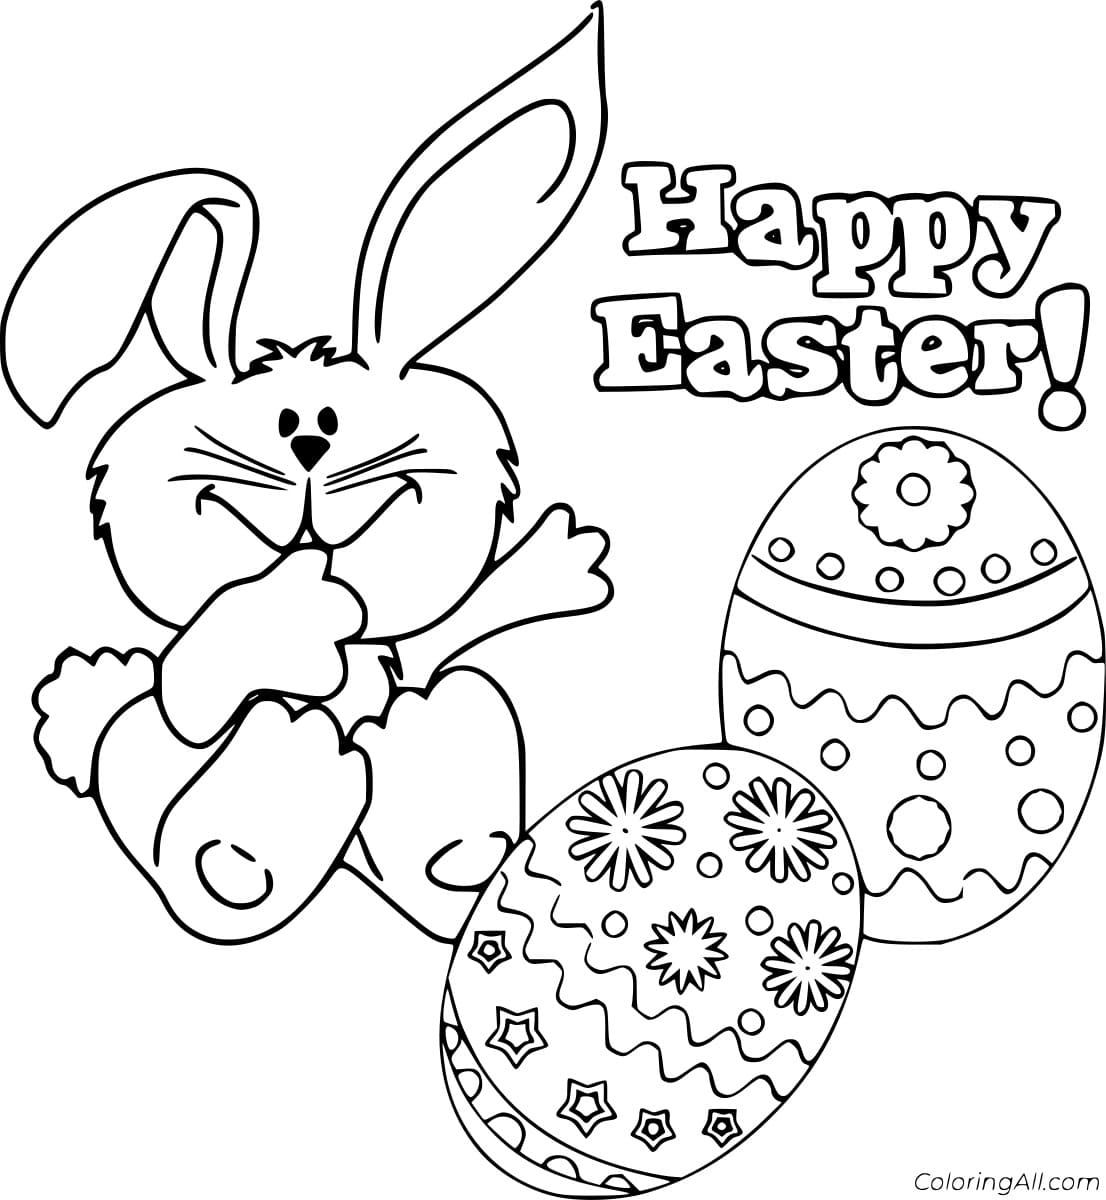 Happy Easter With Two Eggs Image For Kids Coloring Page